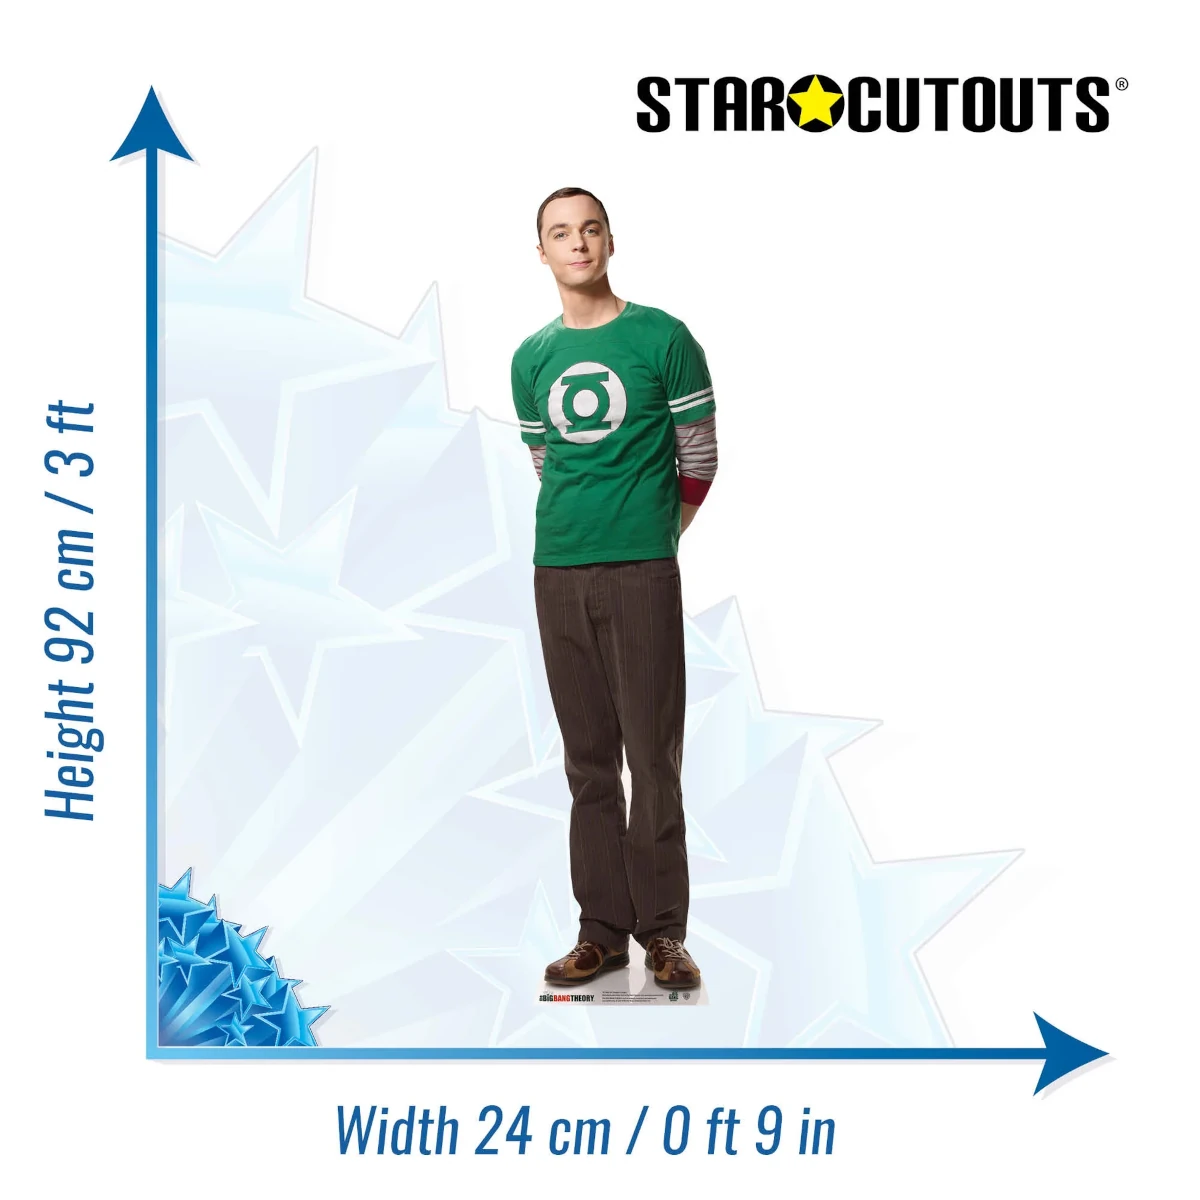 SC1960 Dr Sheldon Cooper (The Big Bang Theory) Official Mini Cardboard Cutout Standee Size